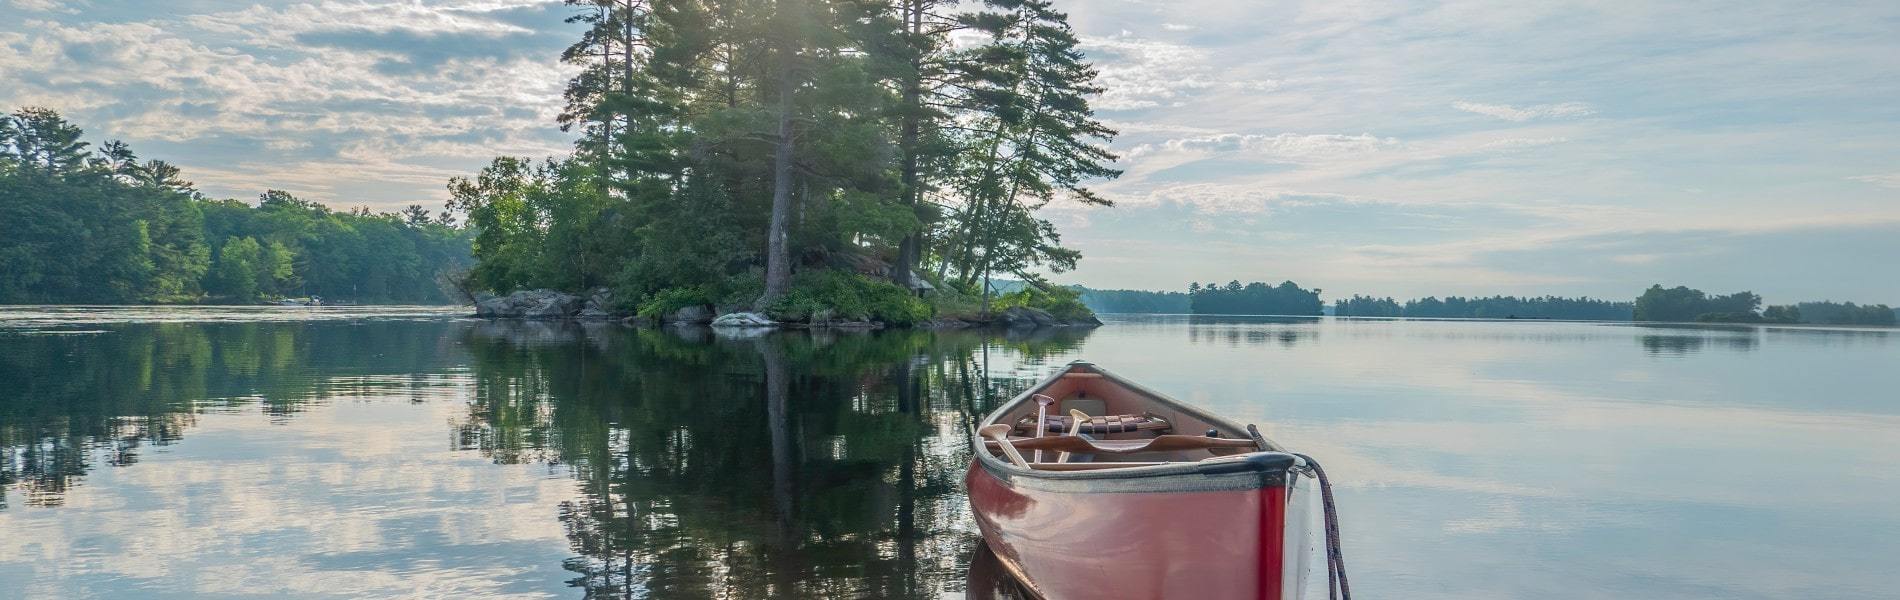 Canoe resting over peaceful waters typical of Ontario lakes